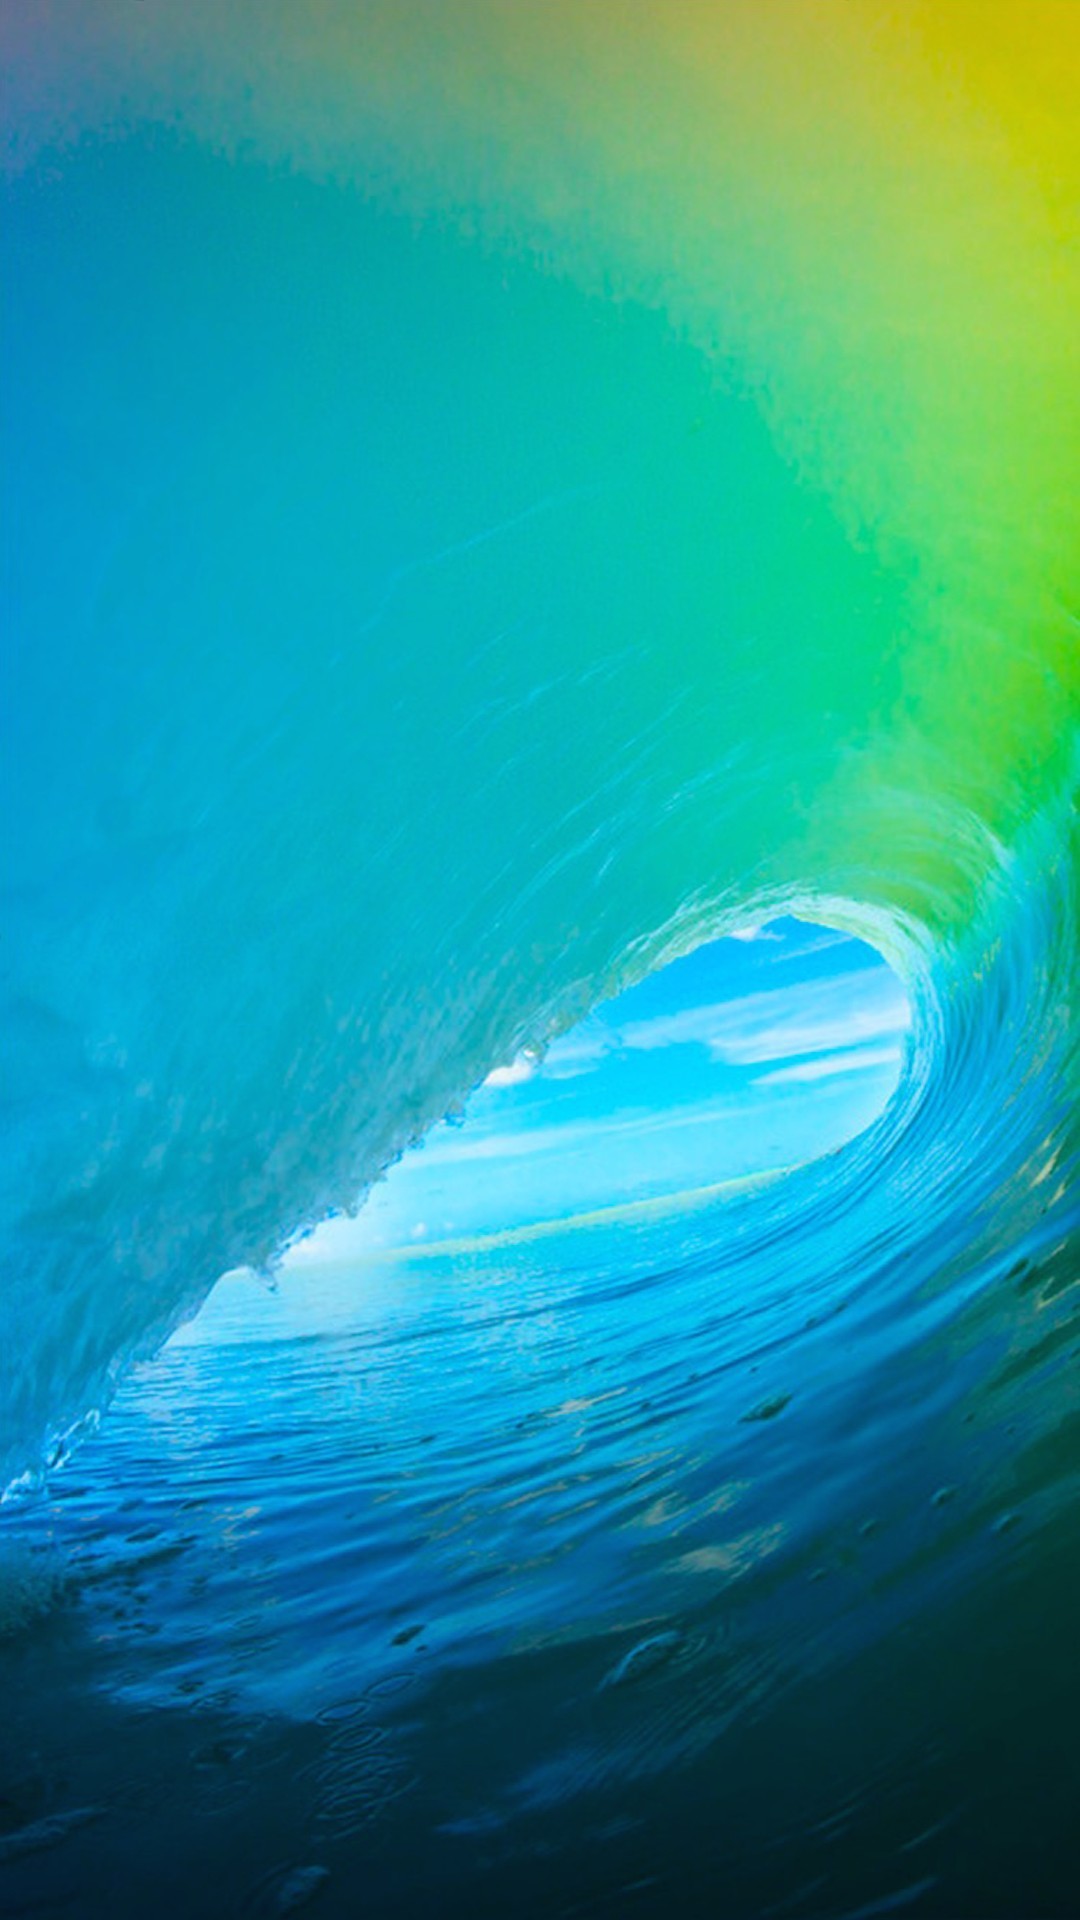 IOS 9 Colorful Surf Wave iPhone 6 HD Wallpaper